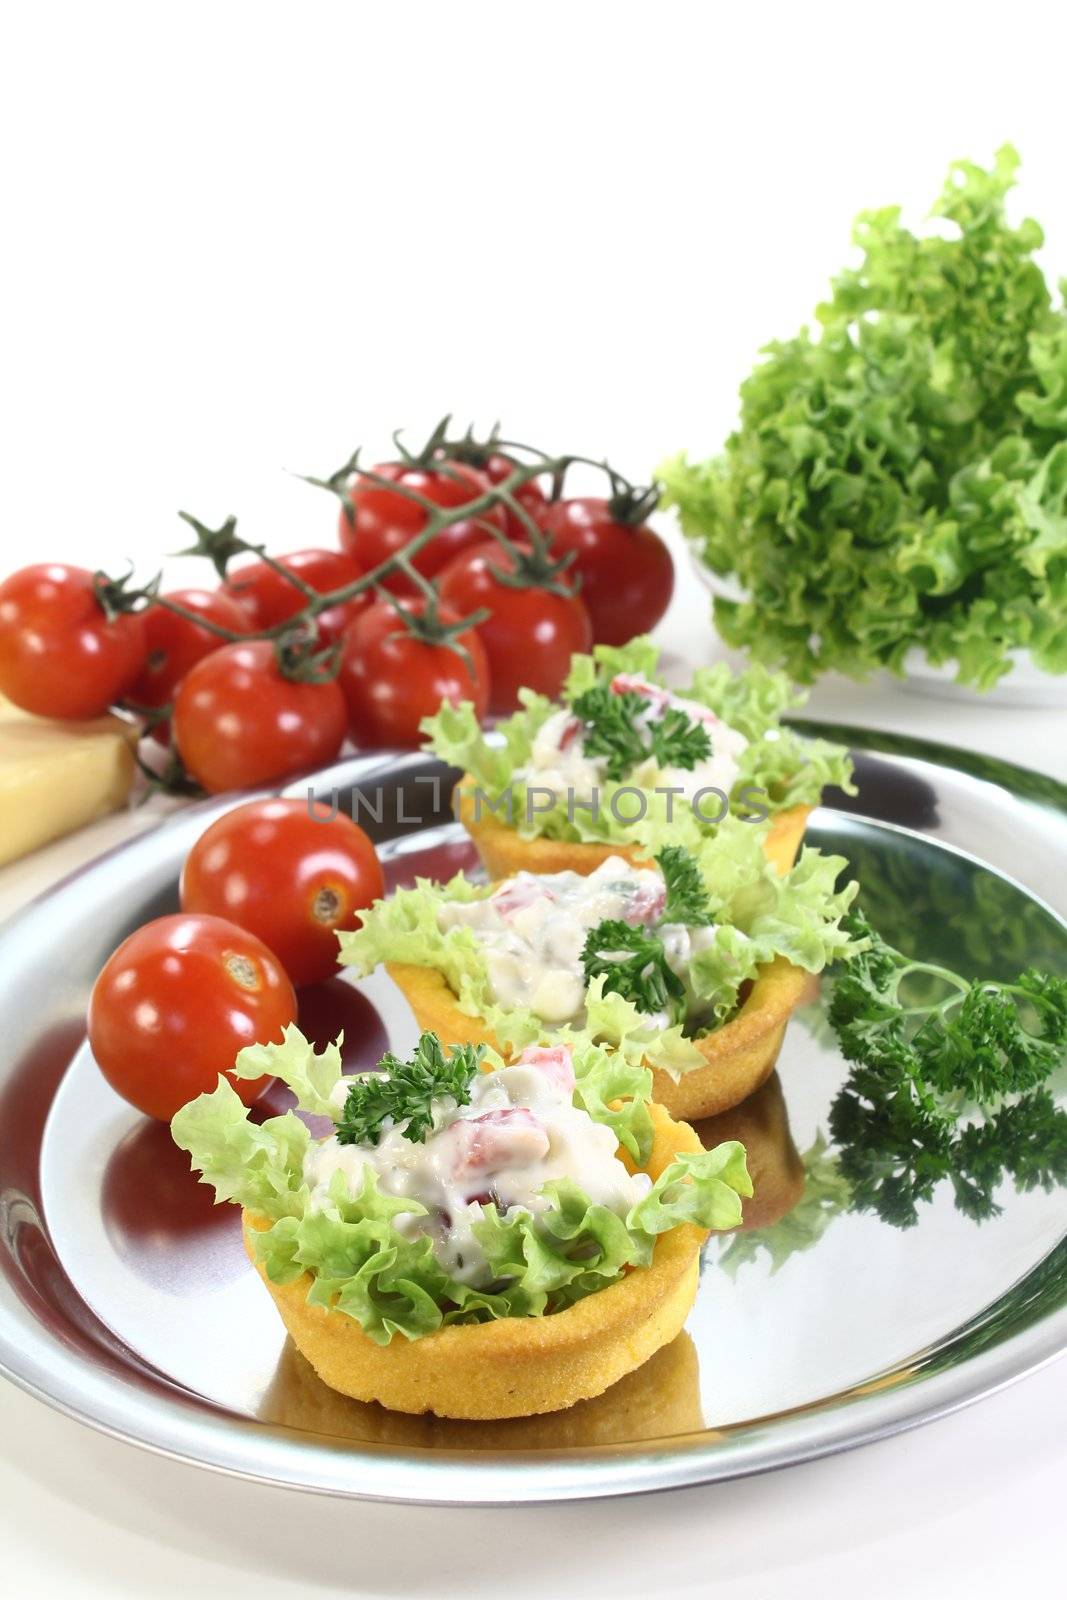 roasted corn basket with cheese salad with cheese, herbs, parsley, tomatoes, peppers and chilli